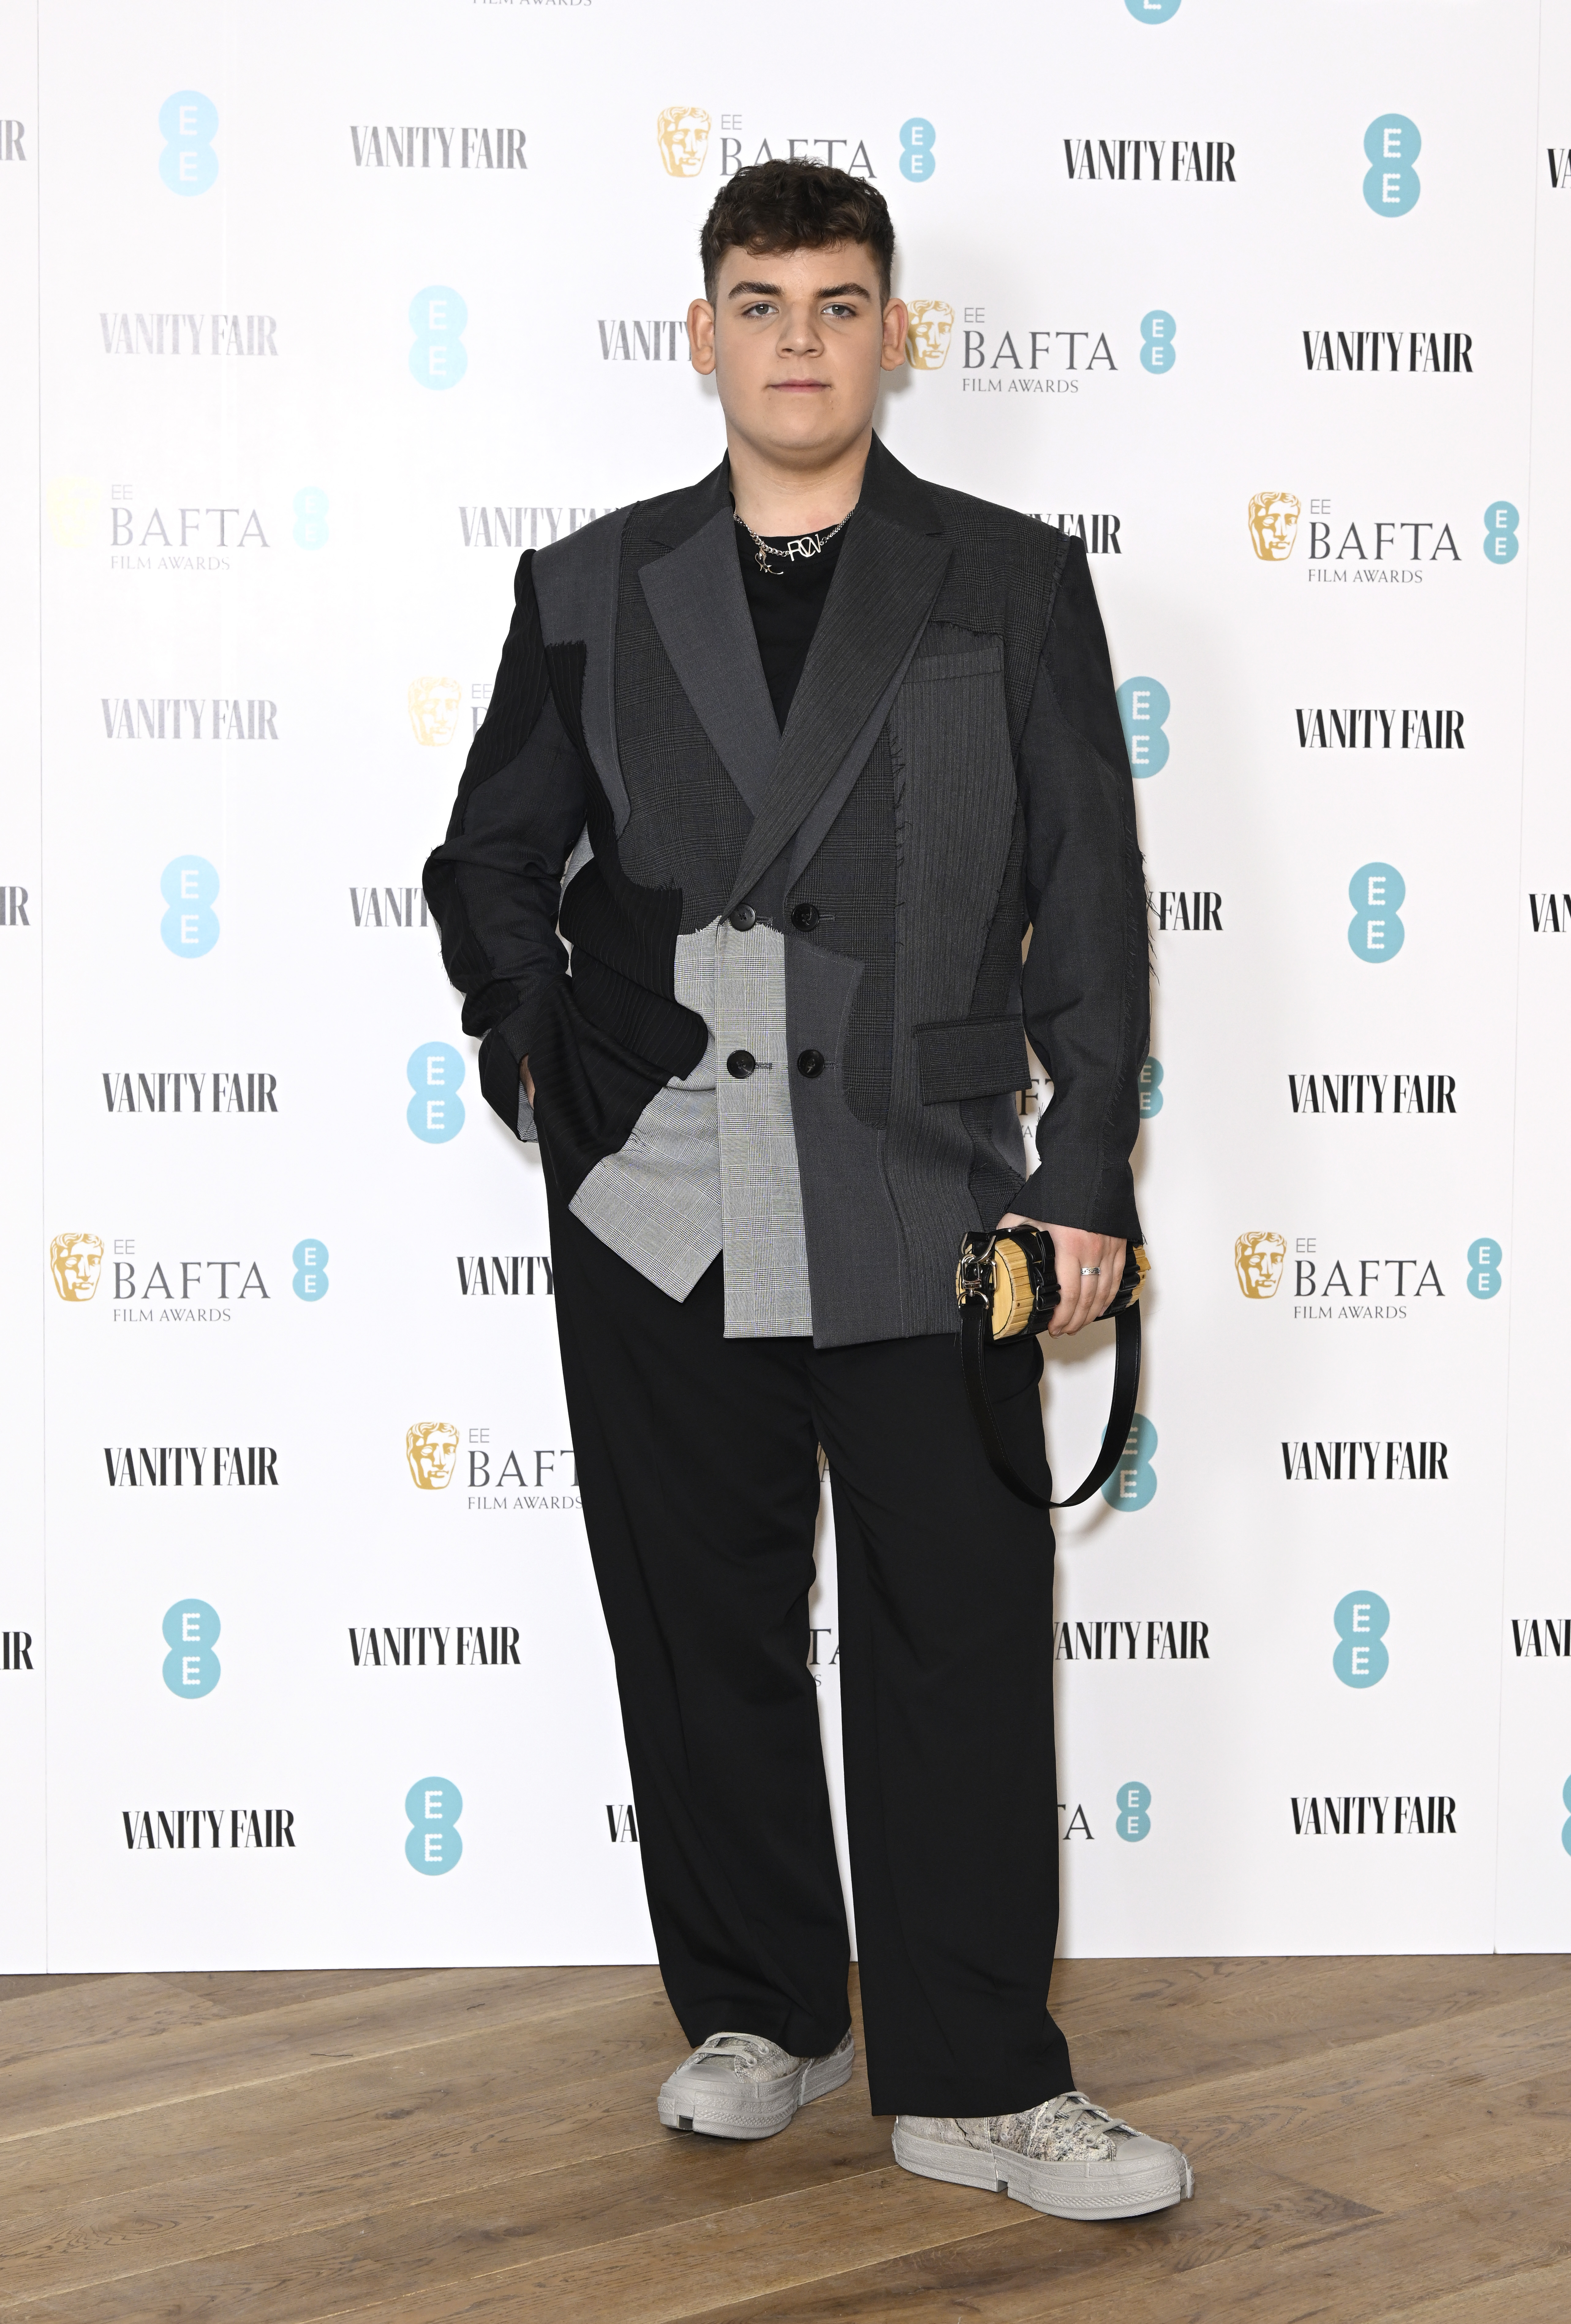 Tobie Donovan at the EE British Academy Film Awards 2023 Vanity Fair Rising Star BAFTAs pre-party on February 2, 2023, in London, England. | Source: Getty Images